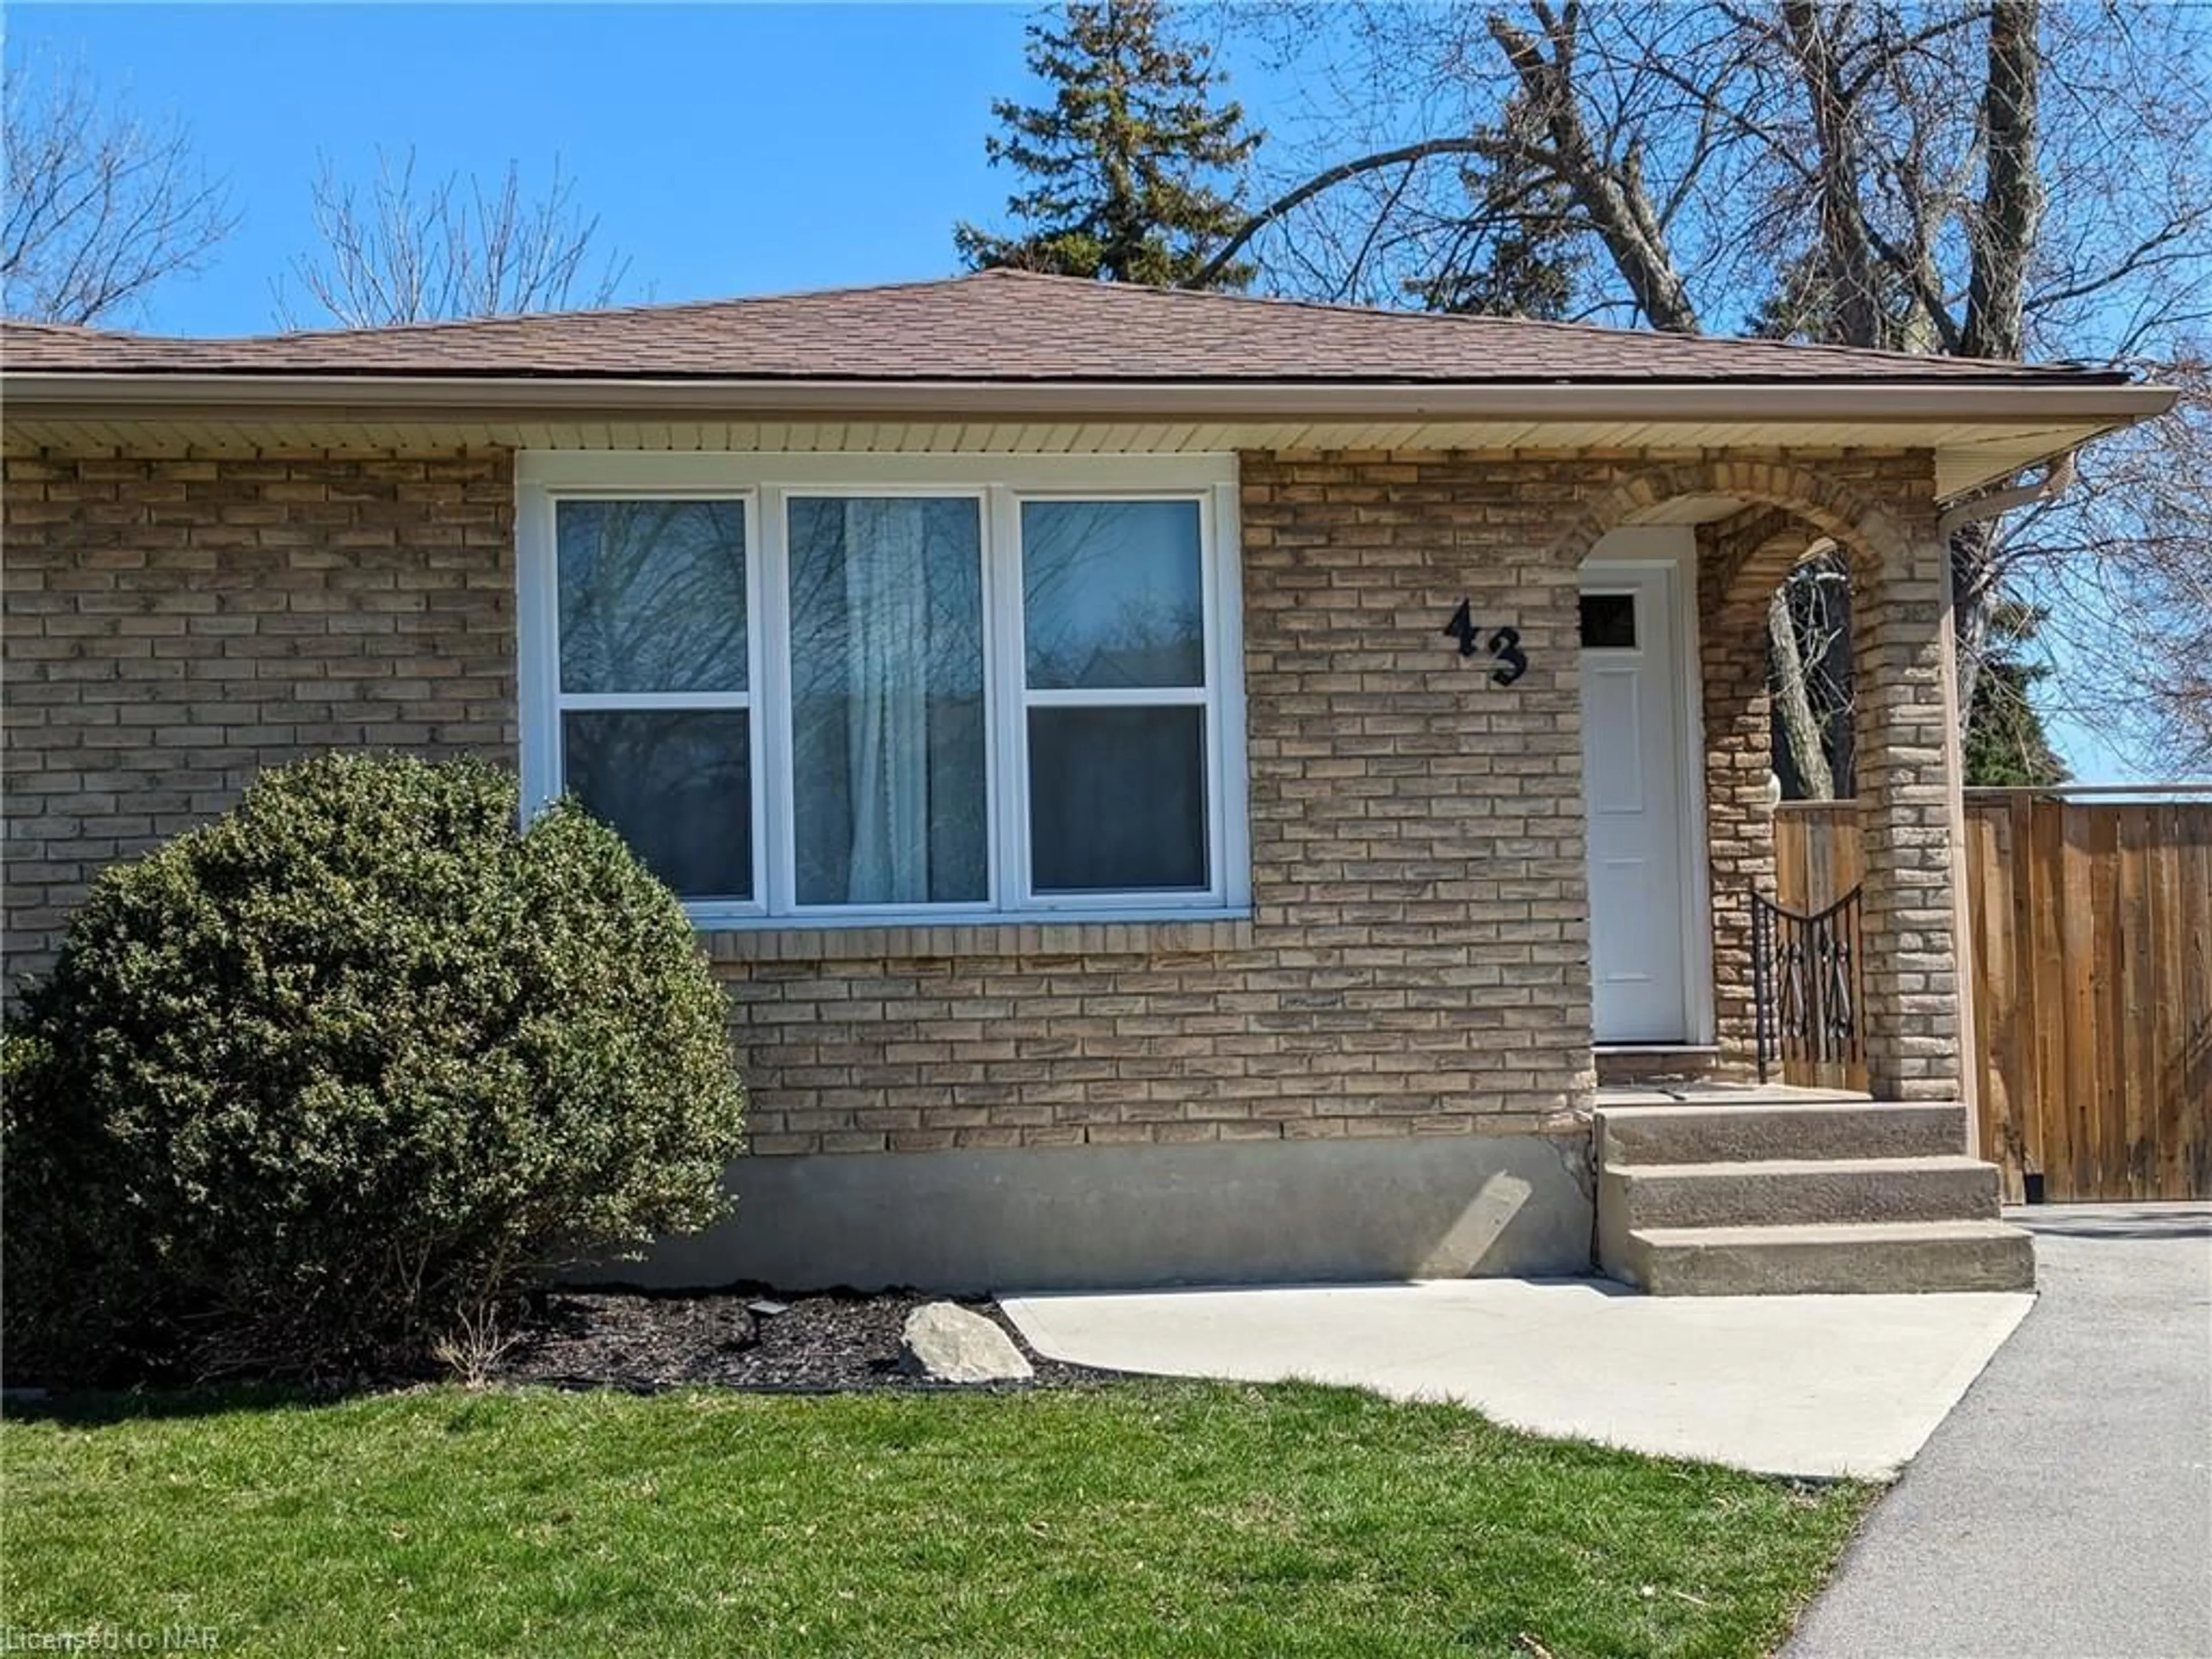 Home with brick exterior material for 43 Greystone Cres, St. Catharines Ontario L2N 6P1